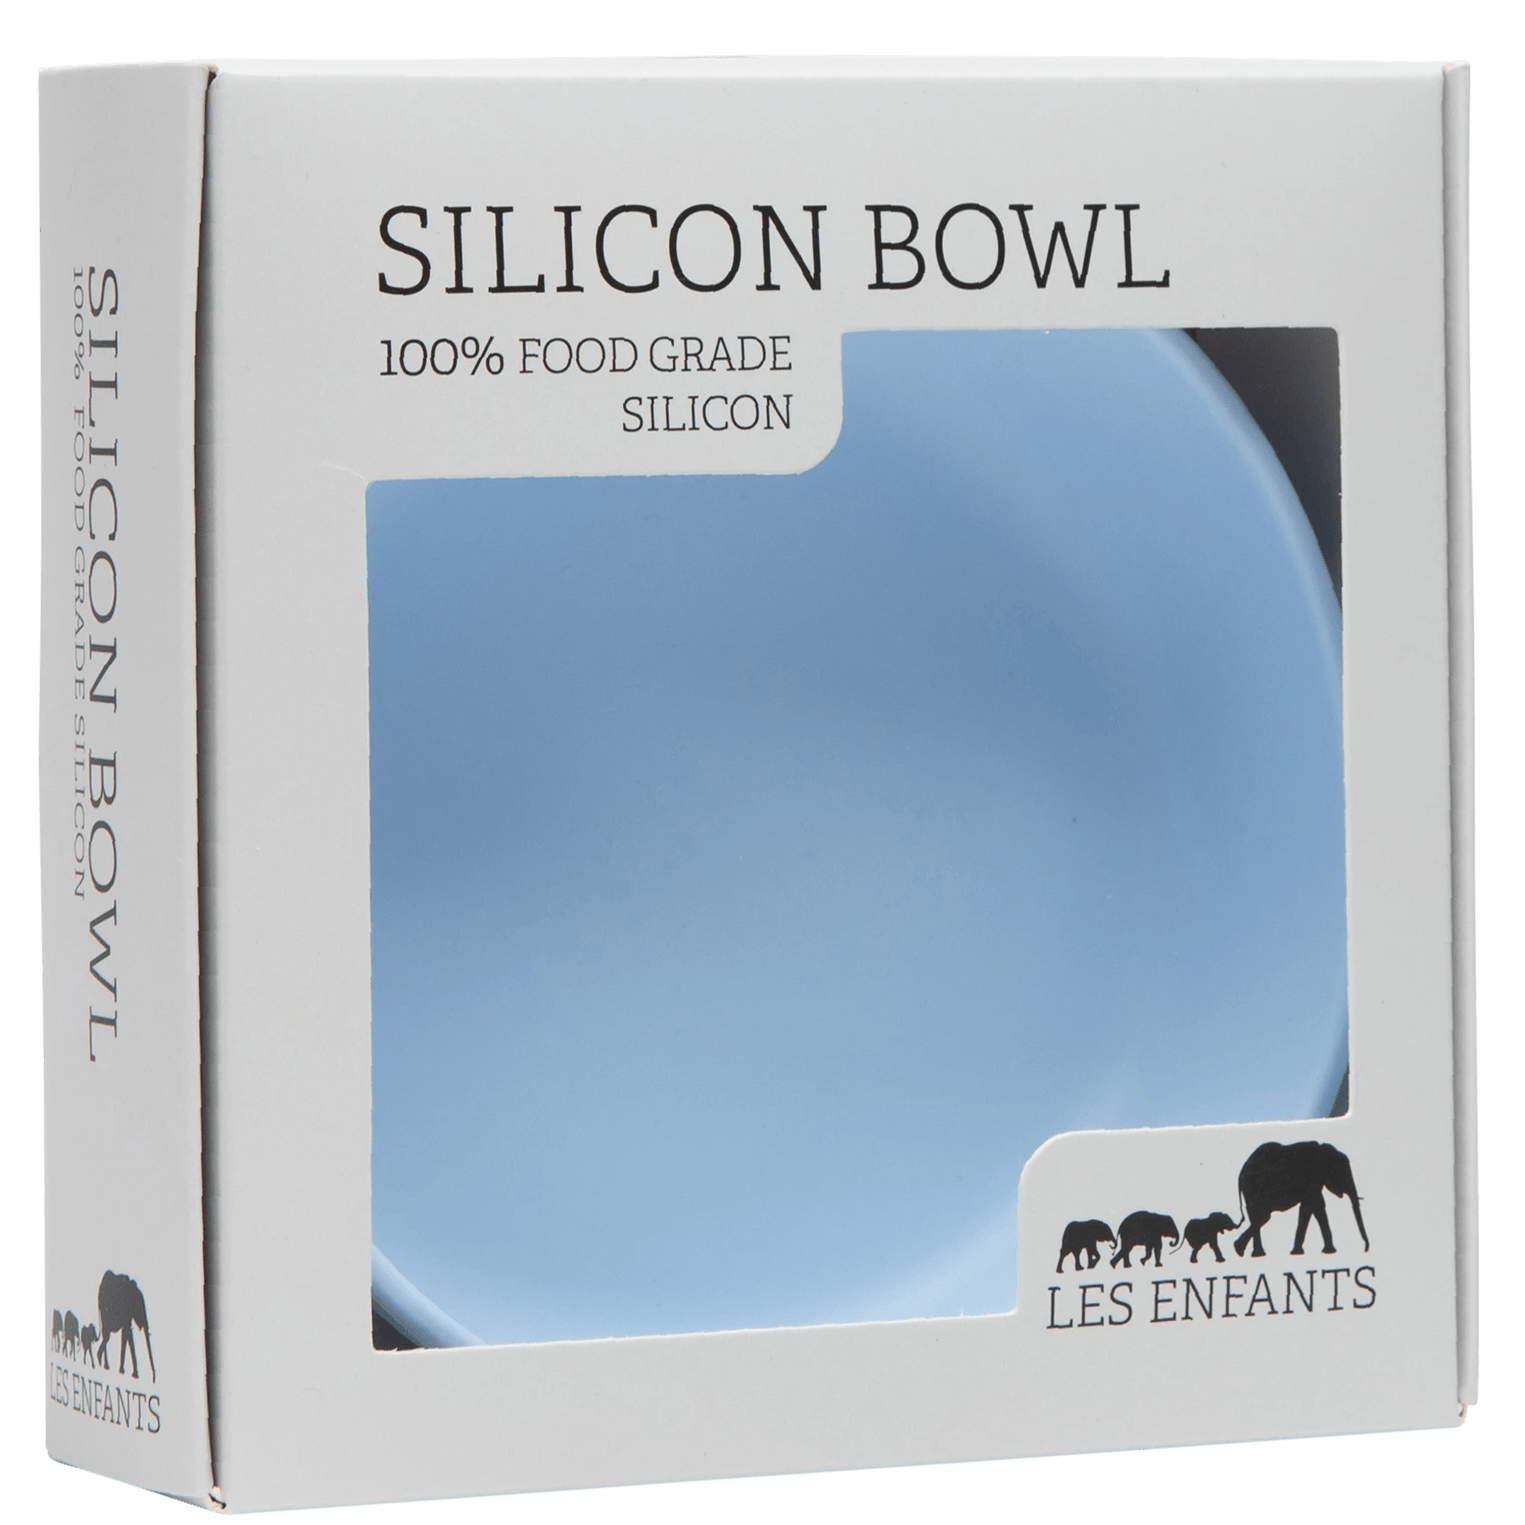 les enfants silicon bowl eating collection in presentation box blue